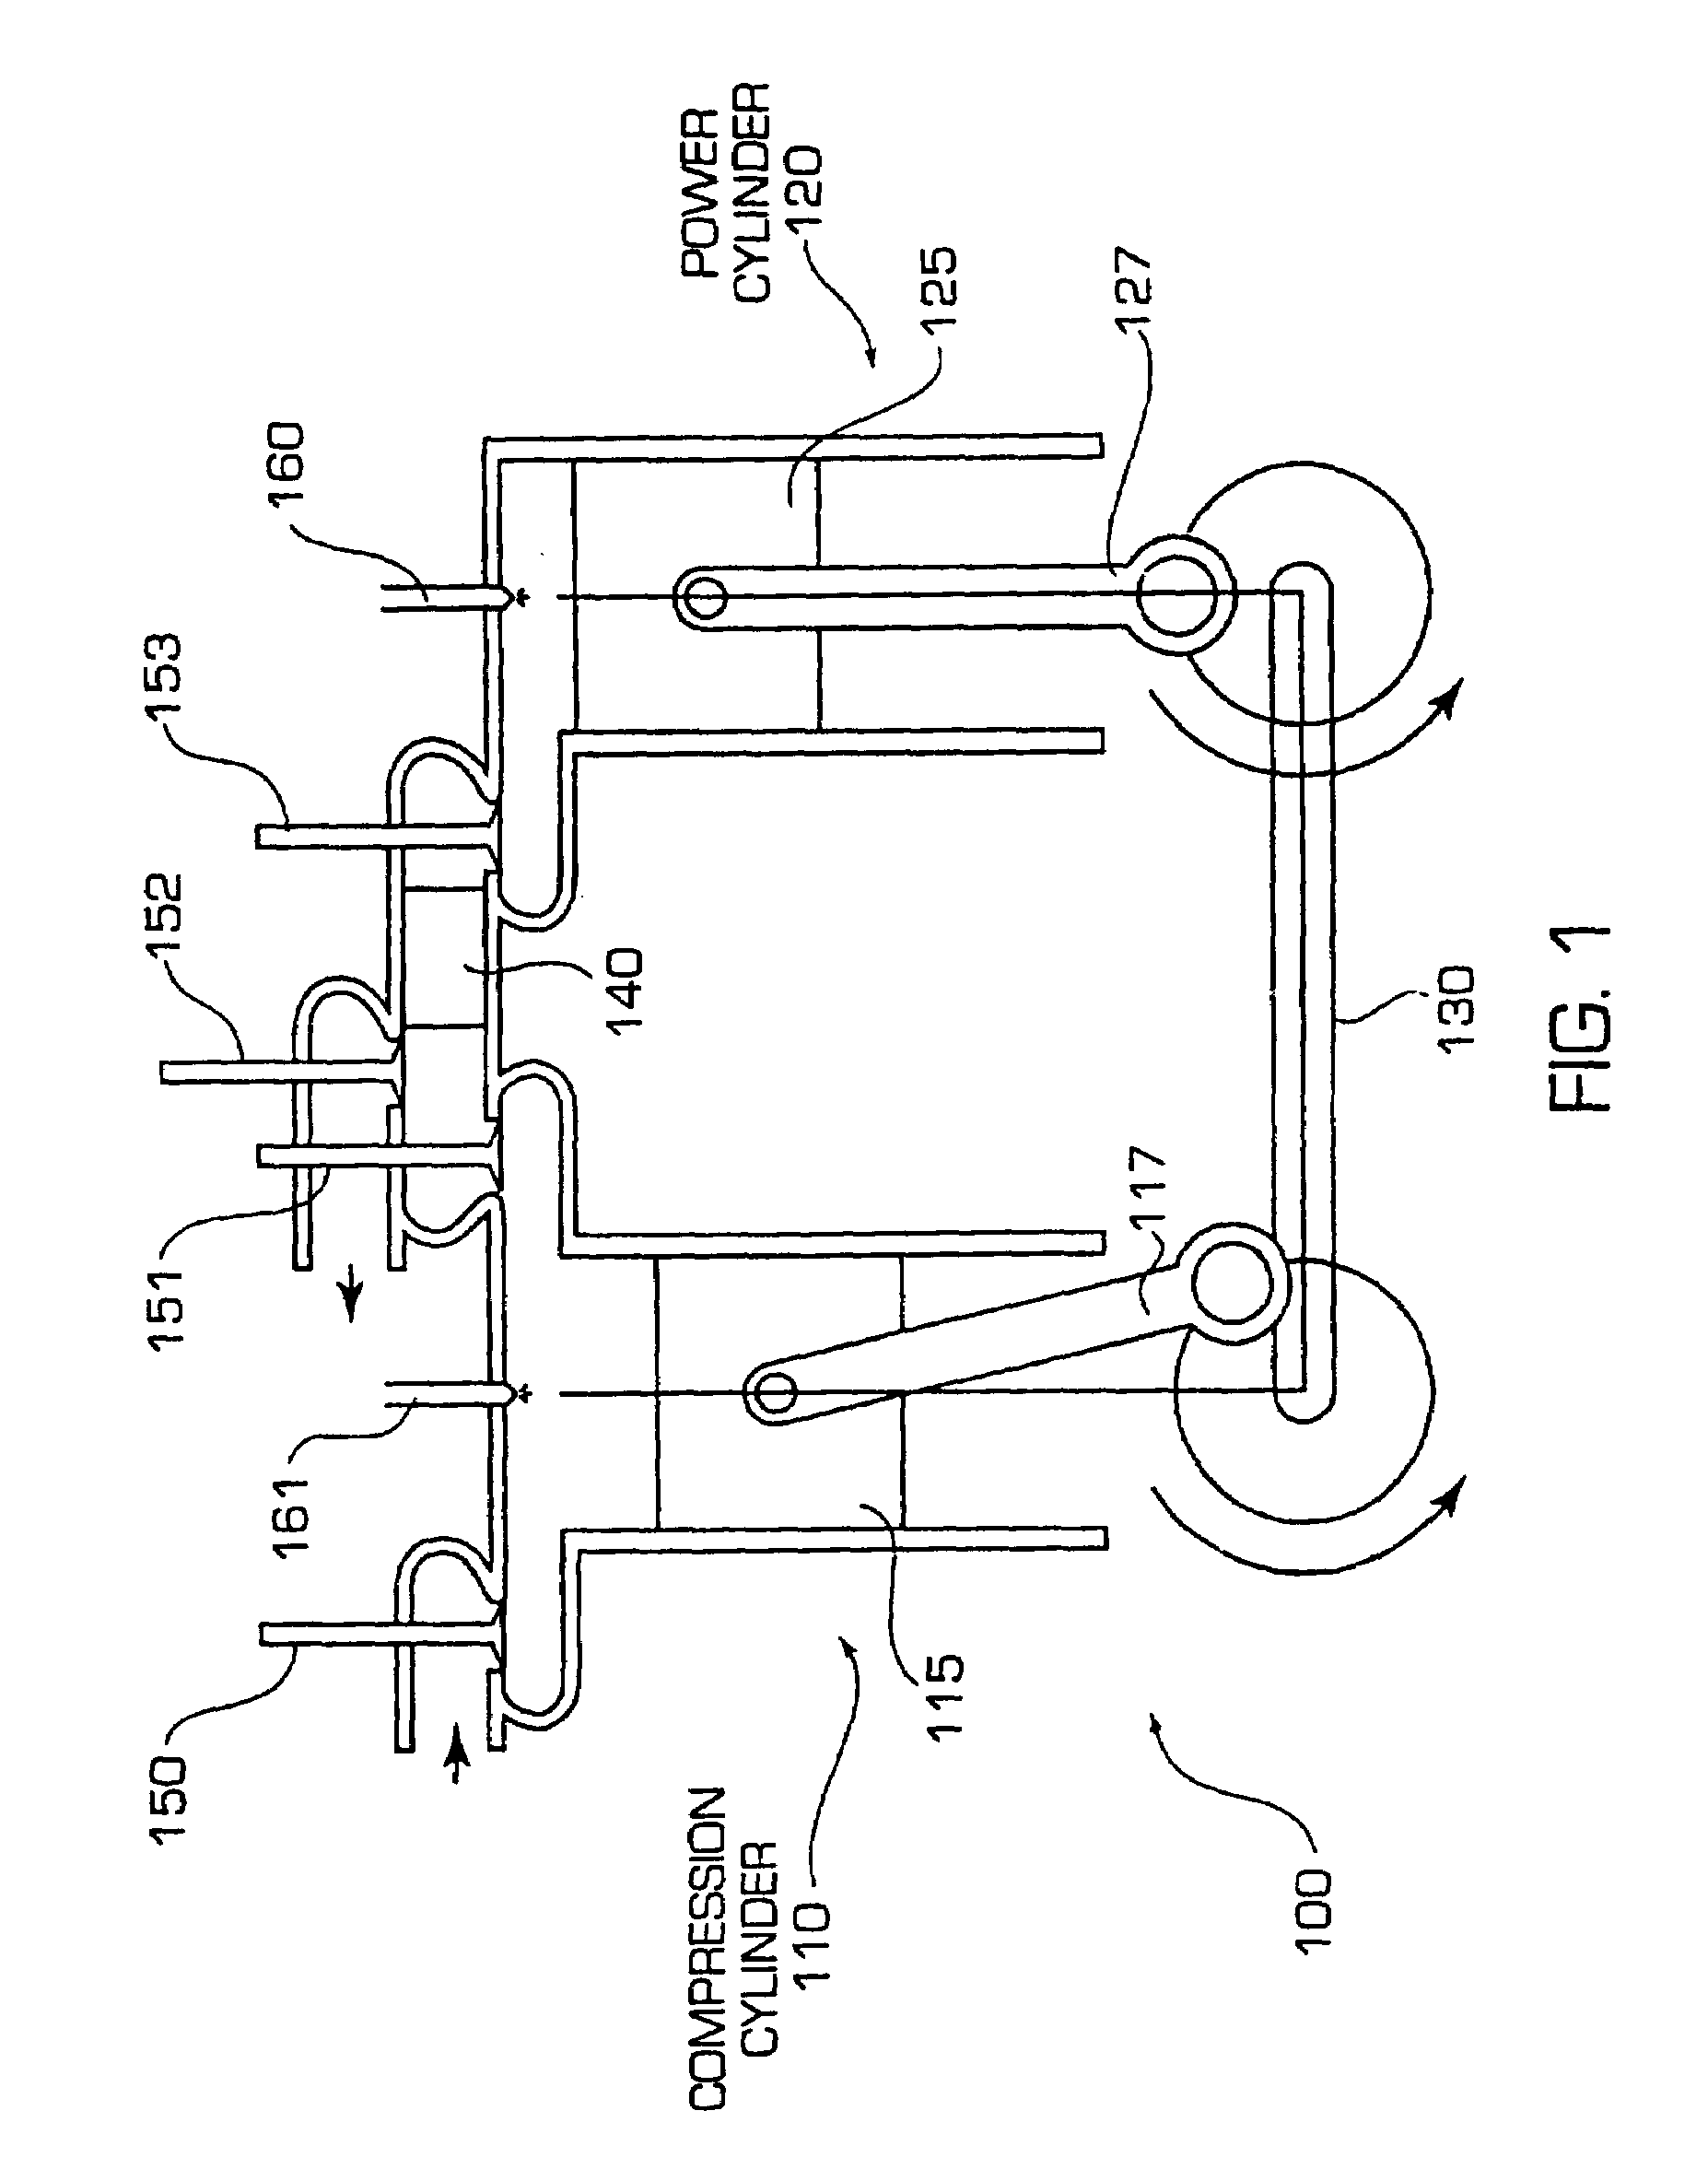 Internal combustion engine with regenerator, hot air ignition, and supercharger-based engine control